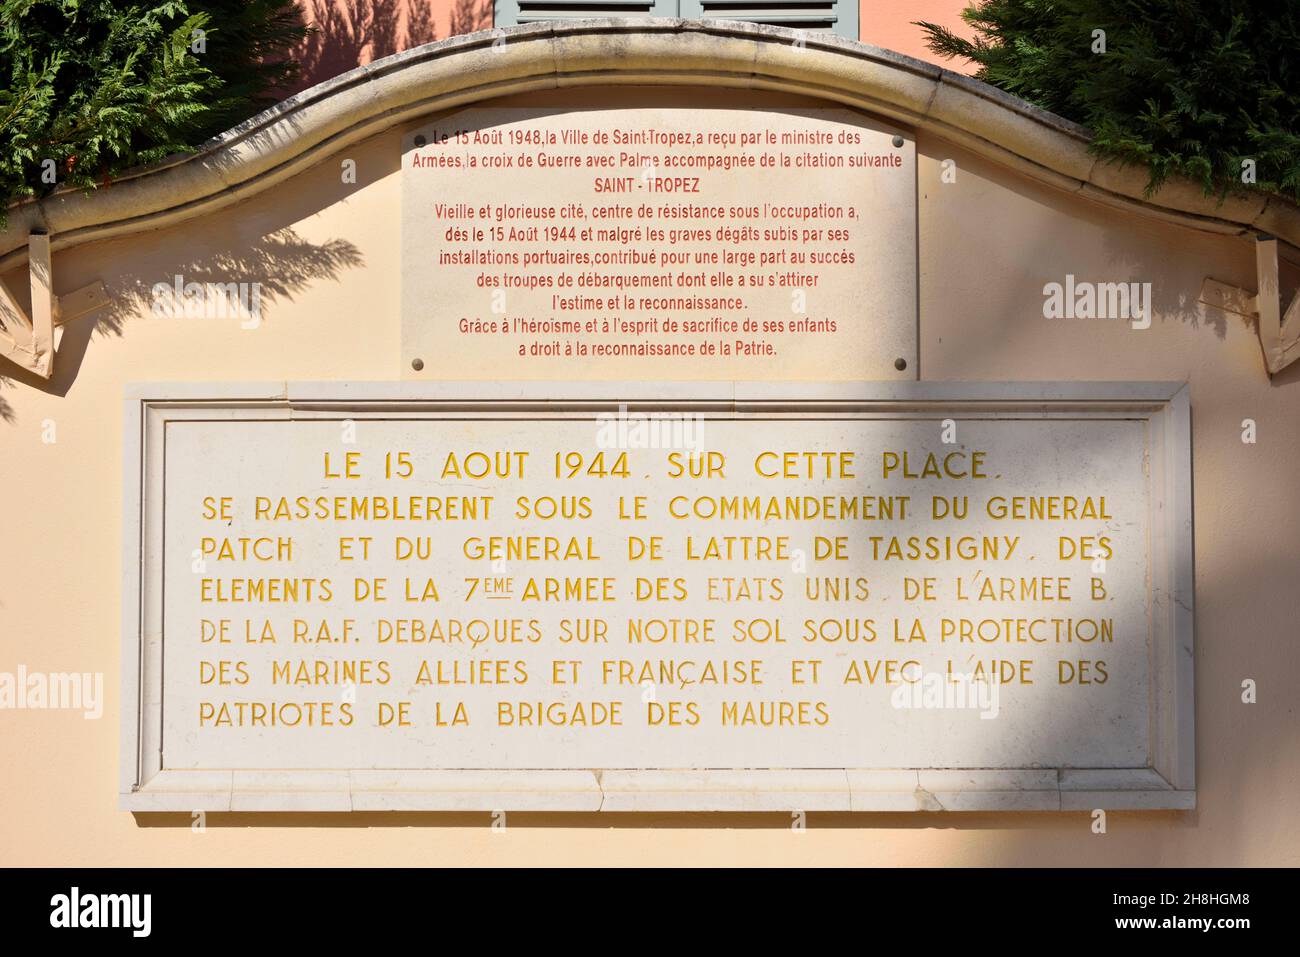 France, Var, Saint-Tropez, Commemorative plaque in thanks to the American soldiers who died during the liberation of Saint-Tropez on August 15, 1944 during the Second World War Stock Photo